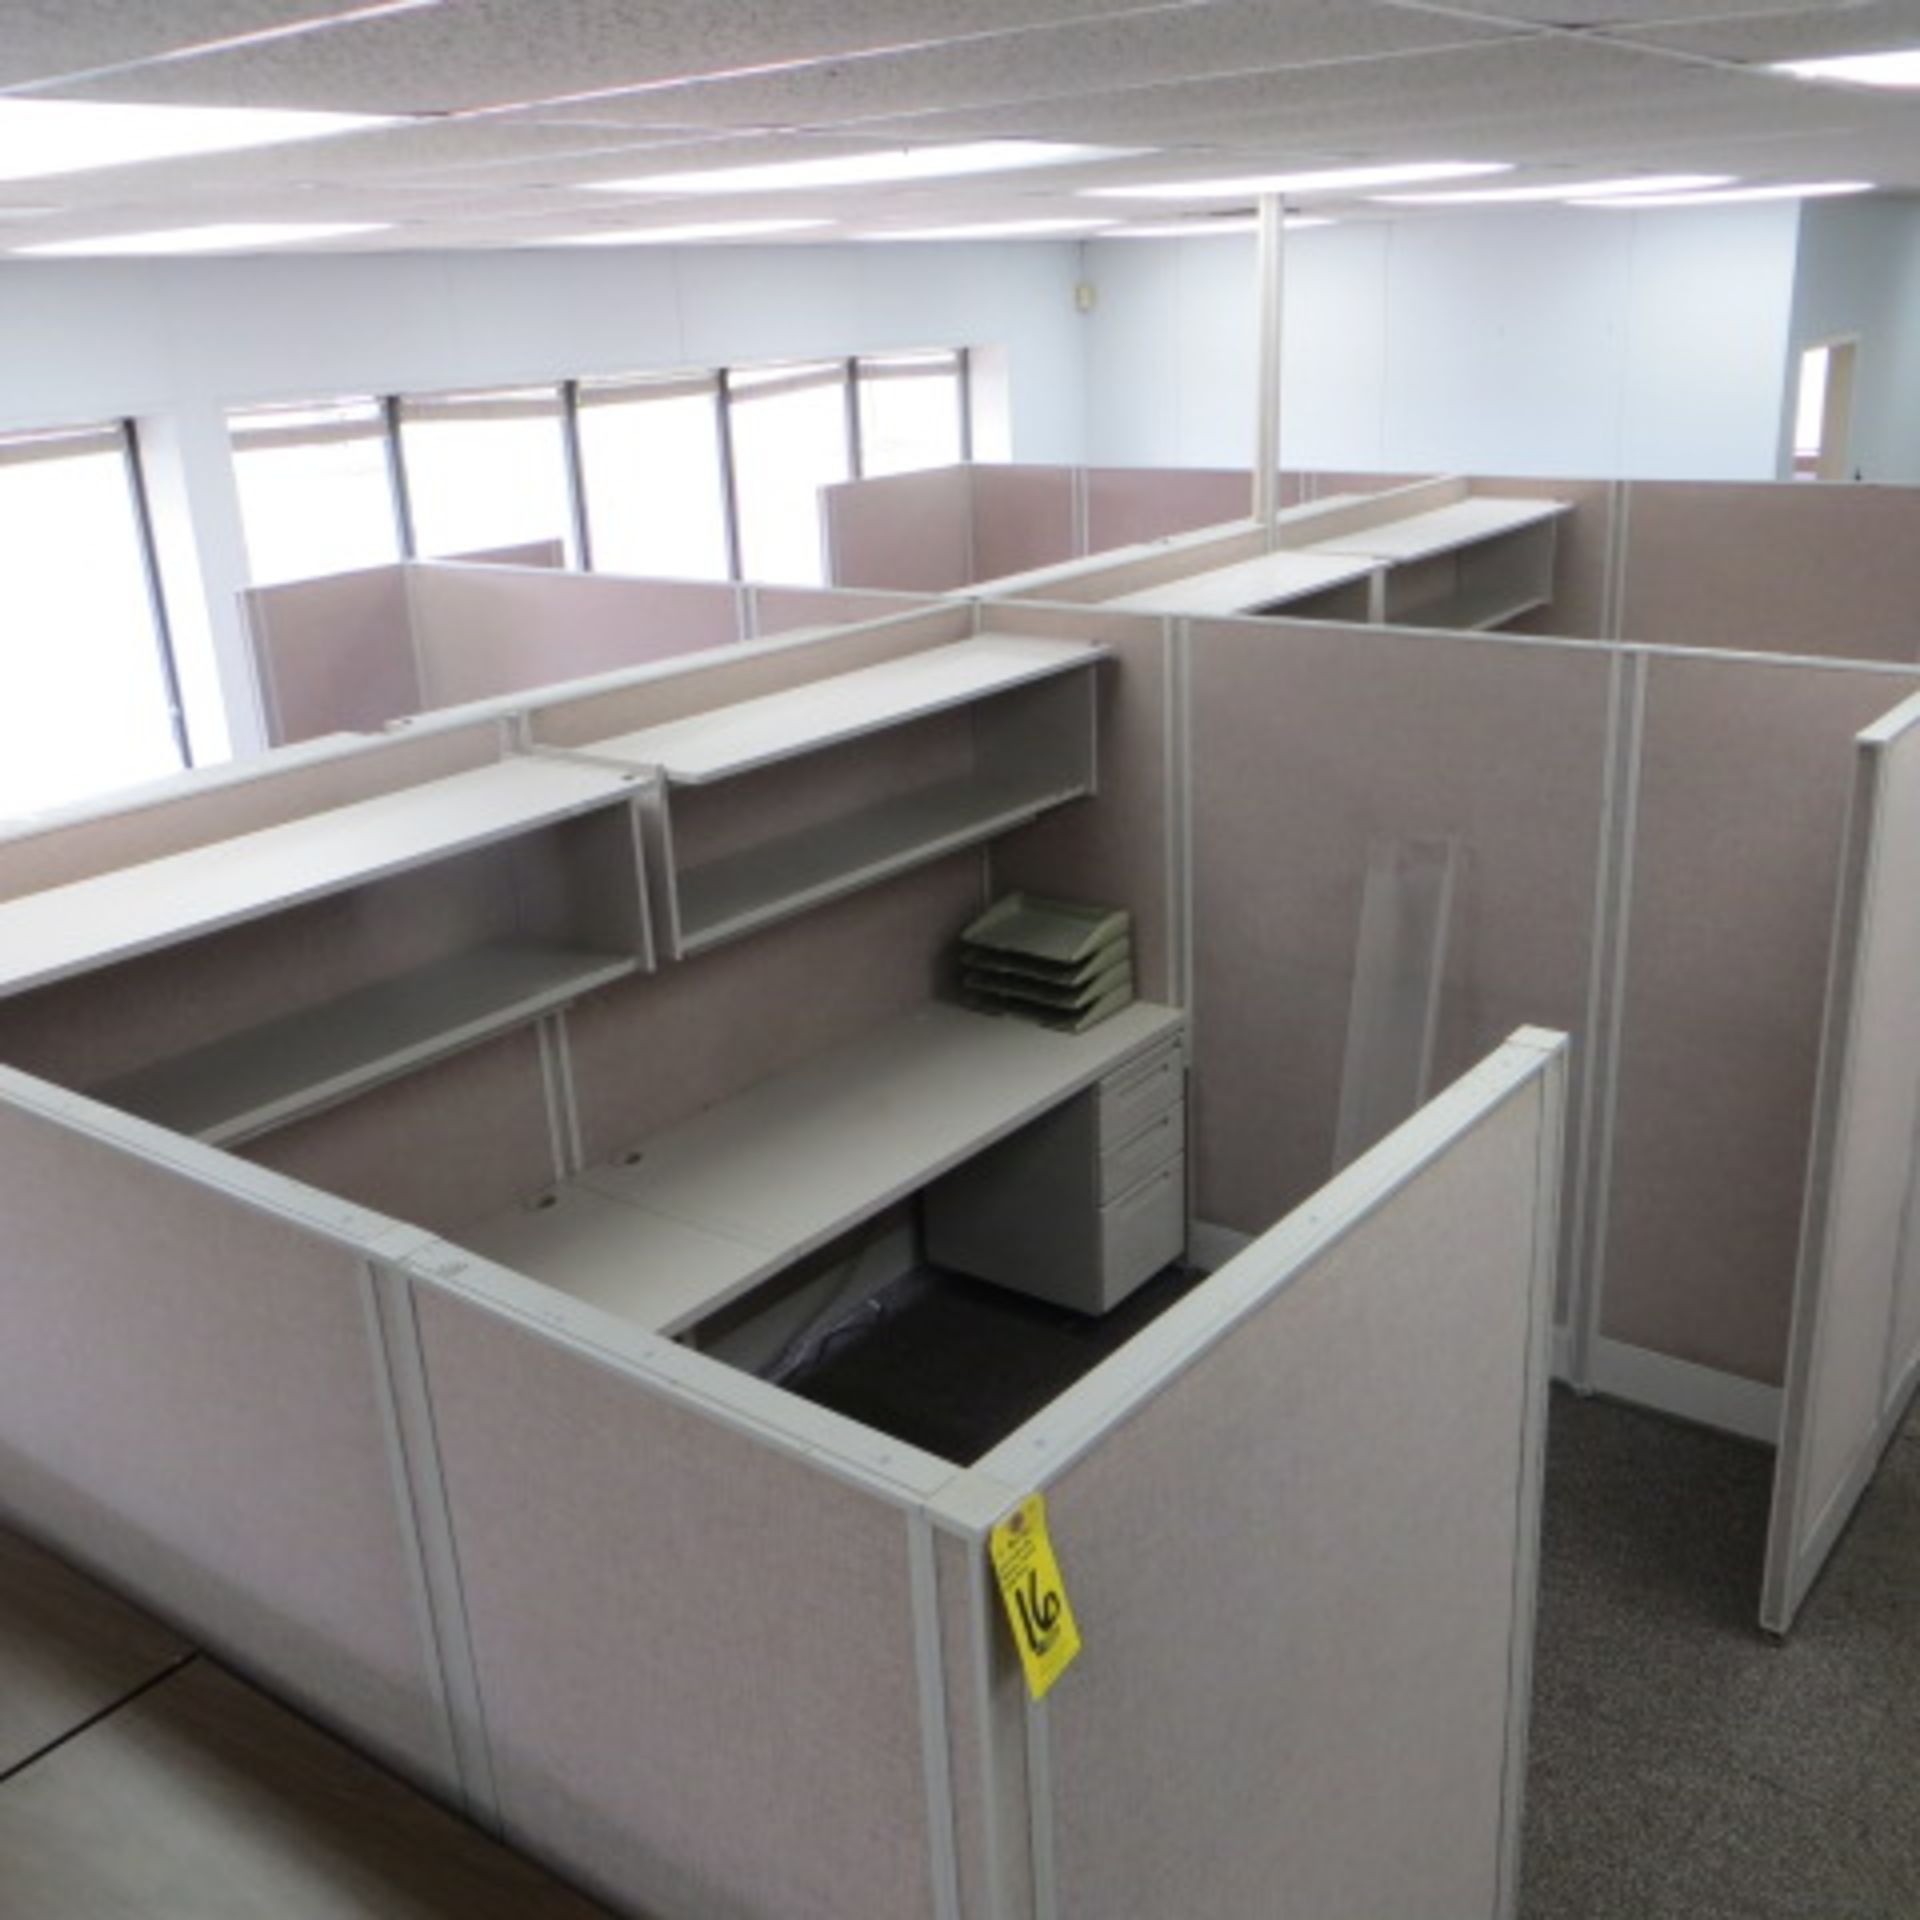 (4) 90 X 120 (APPROX) ACOUSTICAL PANEL WORKSTATIONS W/ WORK SURFACES, O/H SHELVES & PEDESTALS